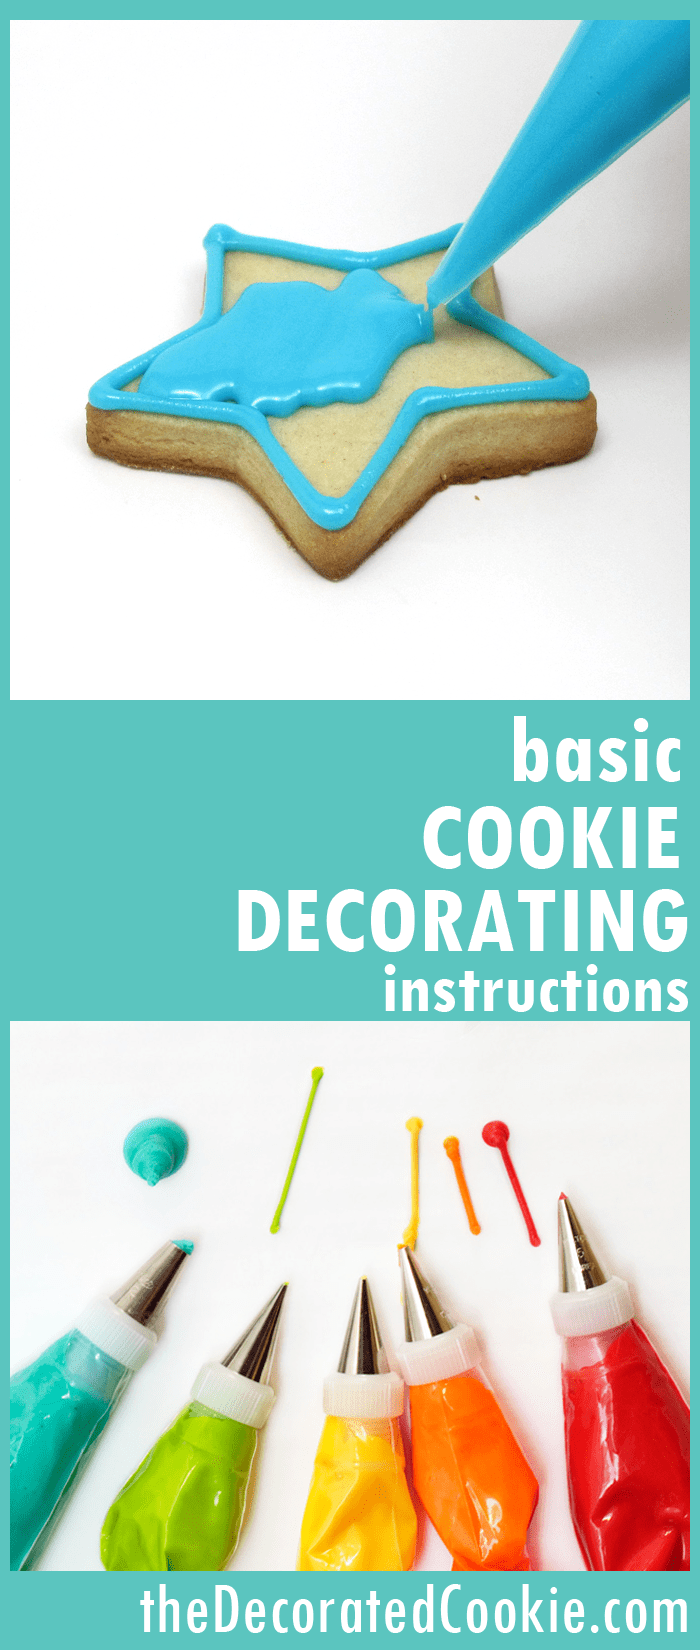 basic cookie decorating instructions -- cut-out cookie and icing recipes, food coloring, piping and outlining, assembling a decorating bag, flooding 